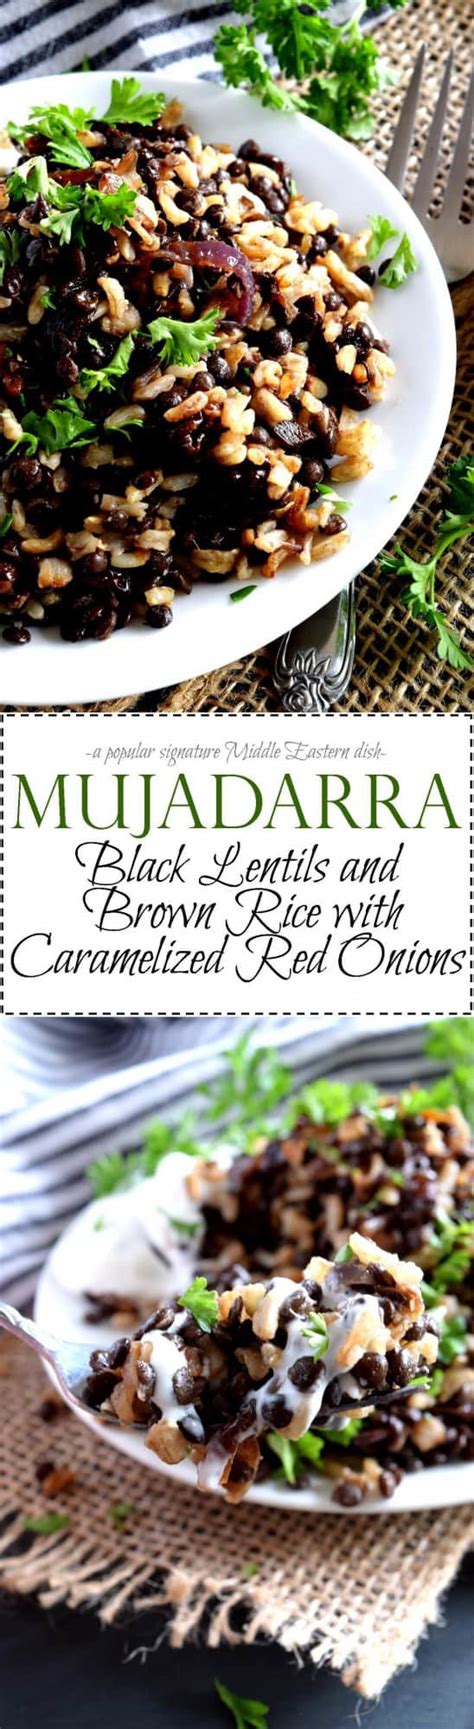 Mujadarra Black Lentils With Brown Rice And Caramelized Red Onions Lord Byrons Kitchen